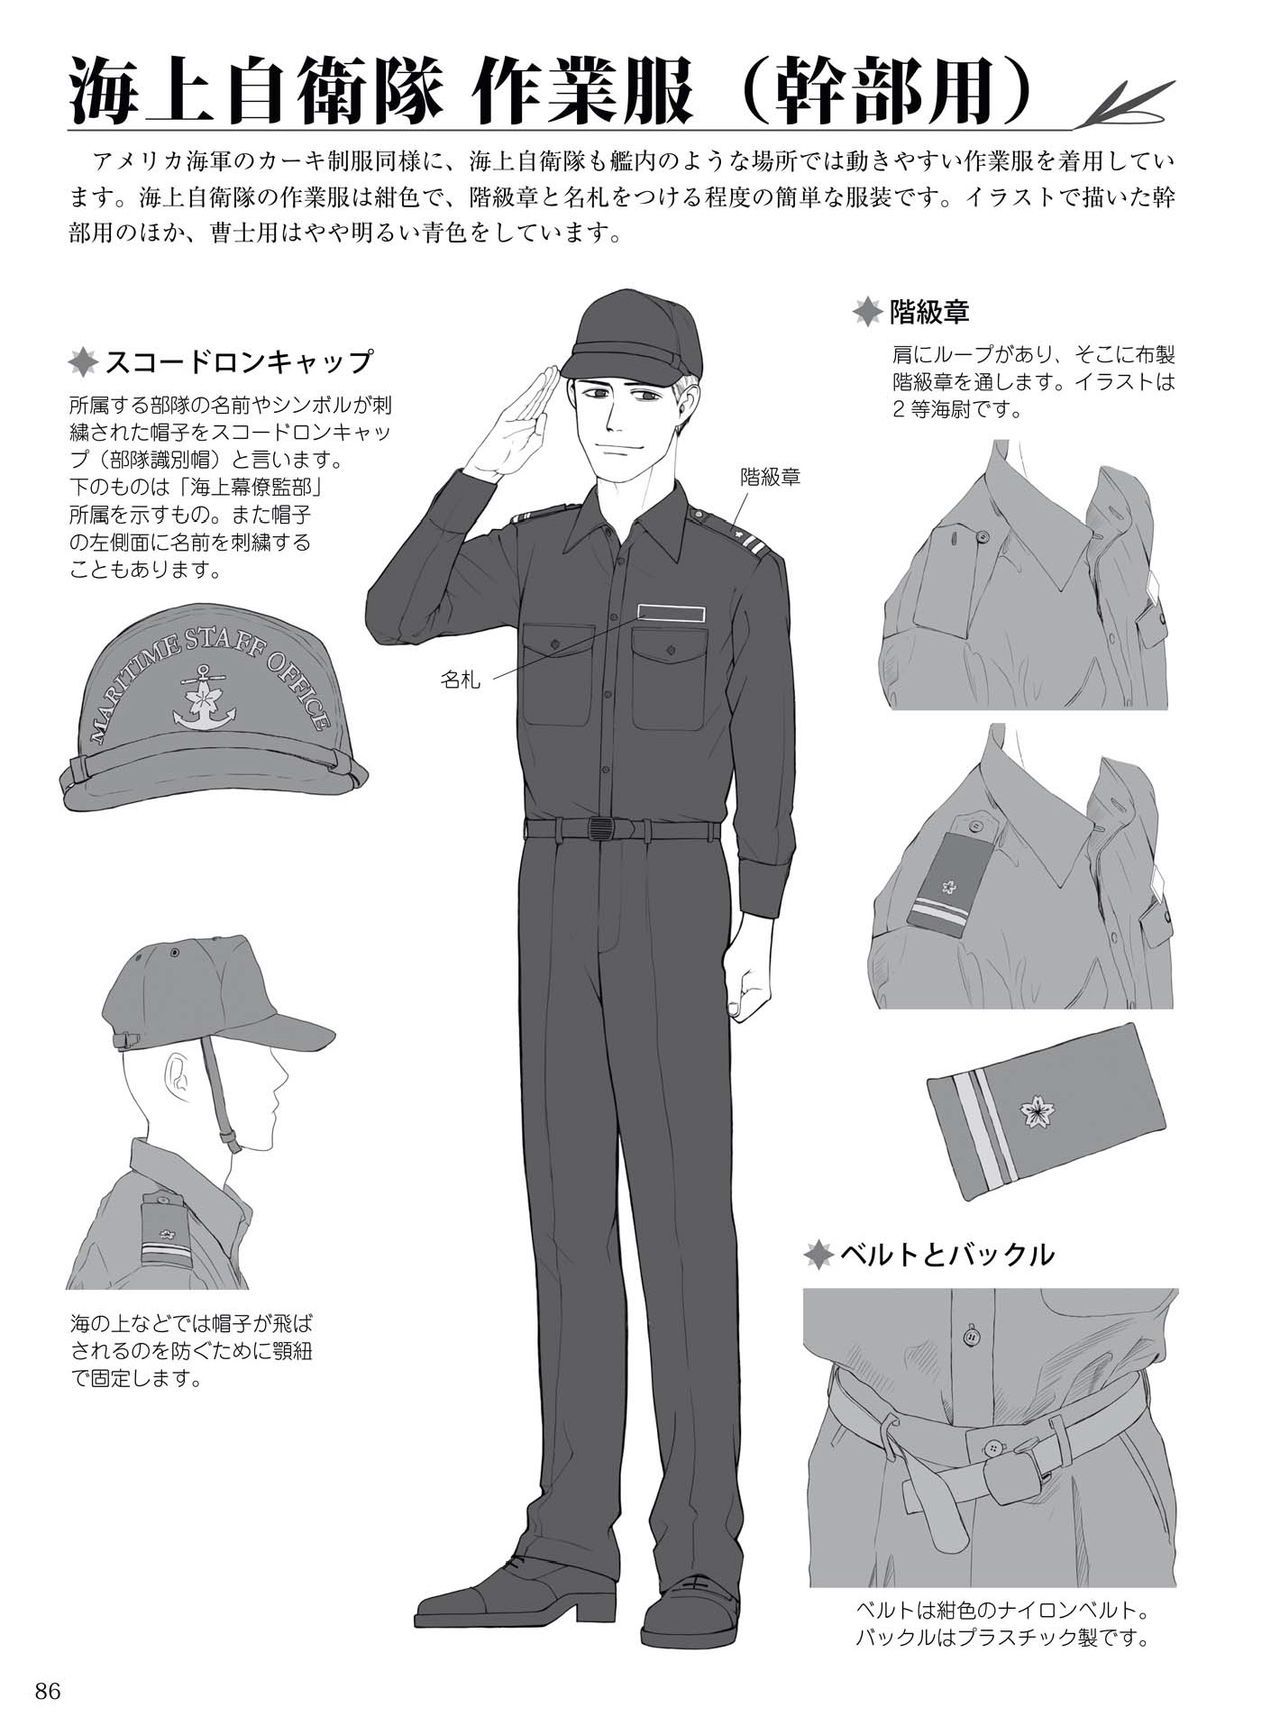 How to draw military uniforms and uniforms From Self-Defense Forces 軍服・制服の描き方 アメリカ軍・自衛隊の制服から戦闘服まで 89